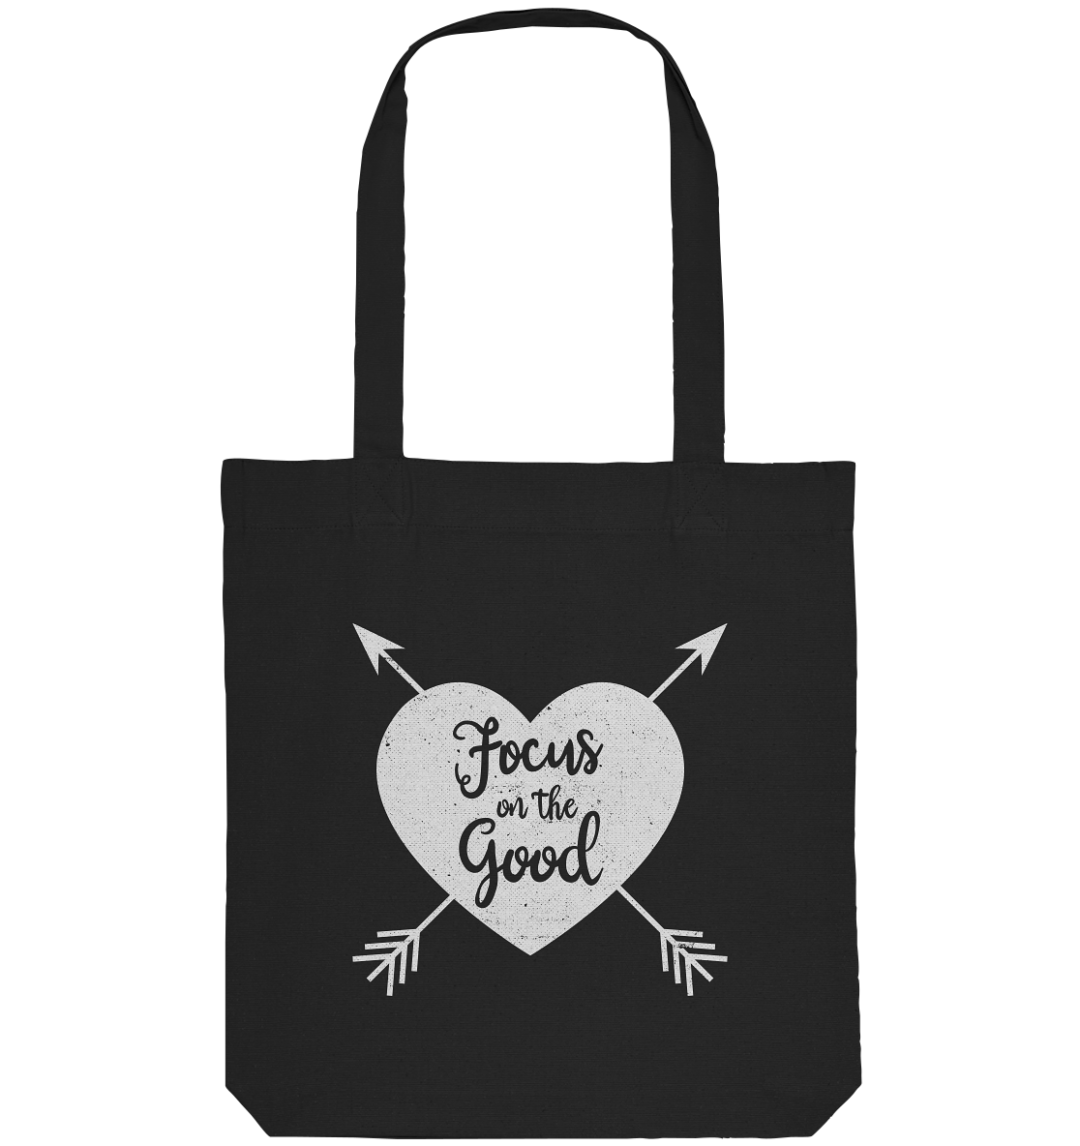 front organic tote bag 272727 1116x 4 Focus on the Good - Organic Tote-Bag